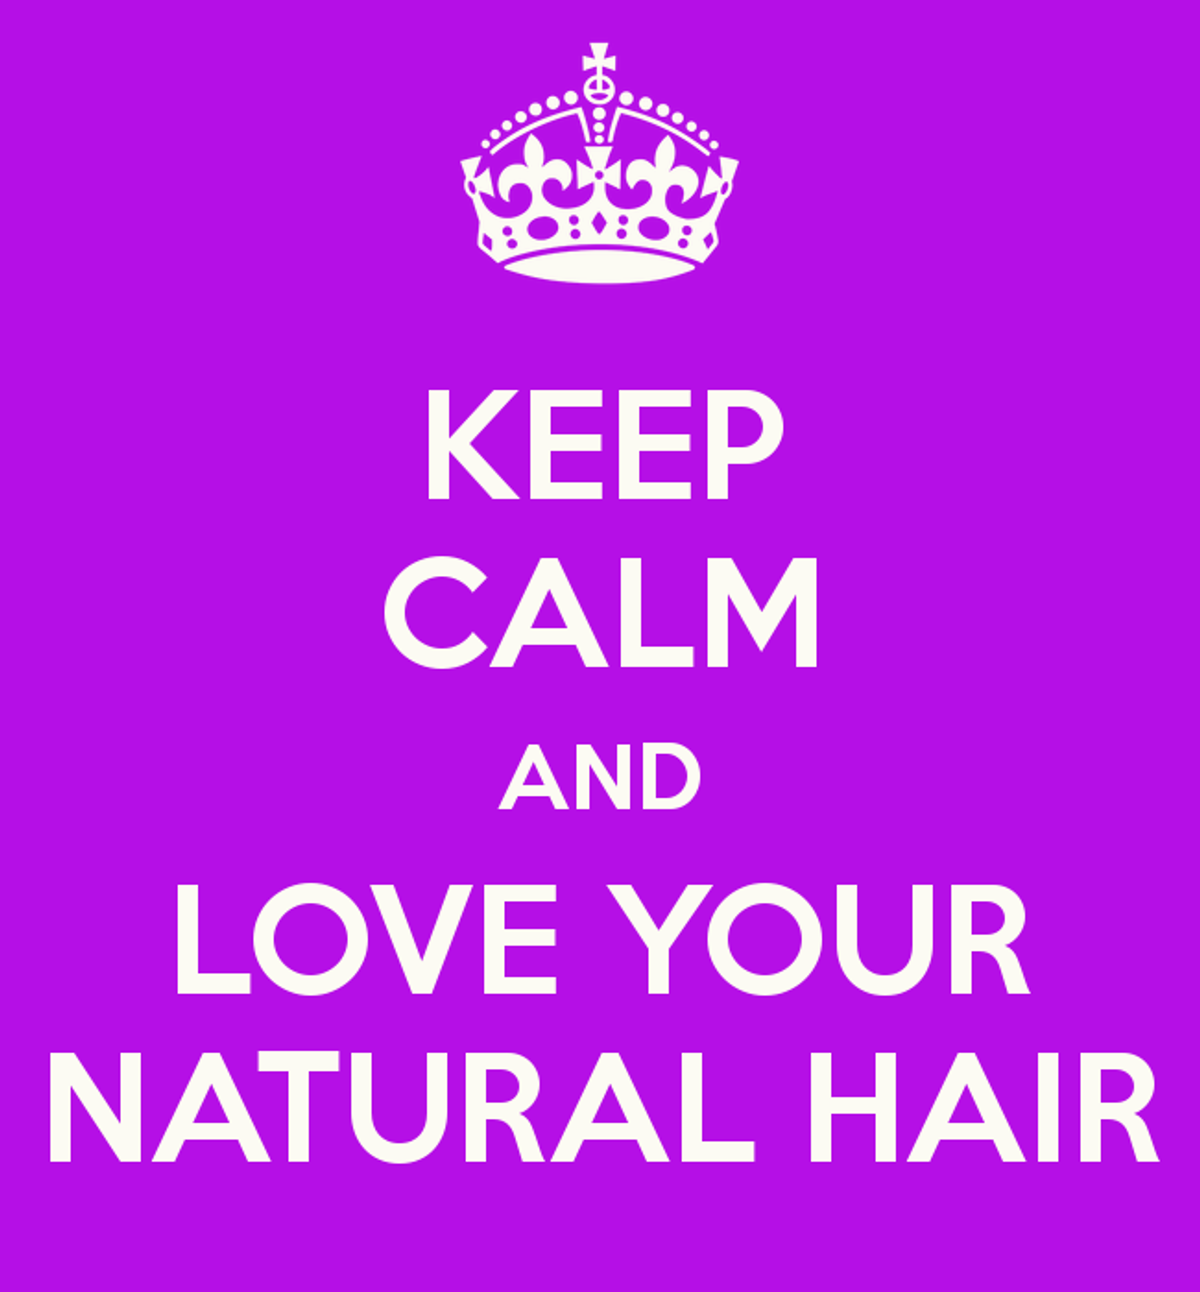 7 Annoying Things Every Naturalista Can Relate To